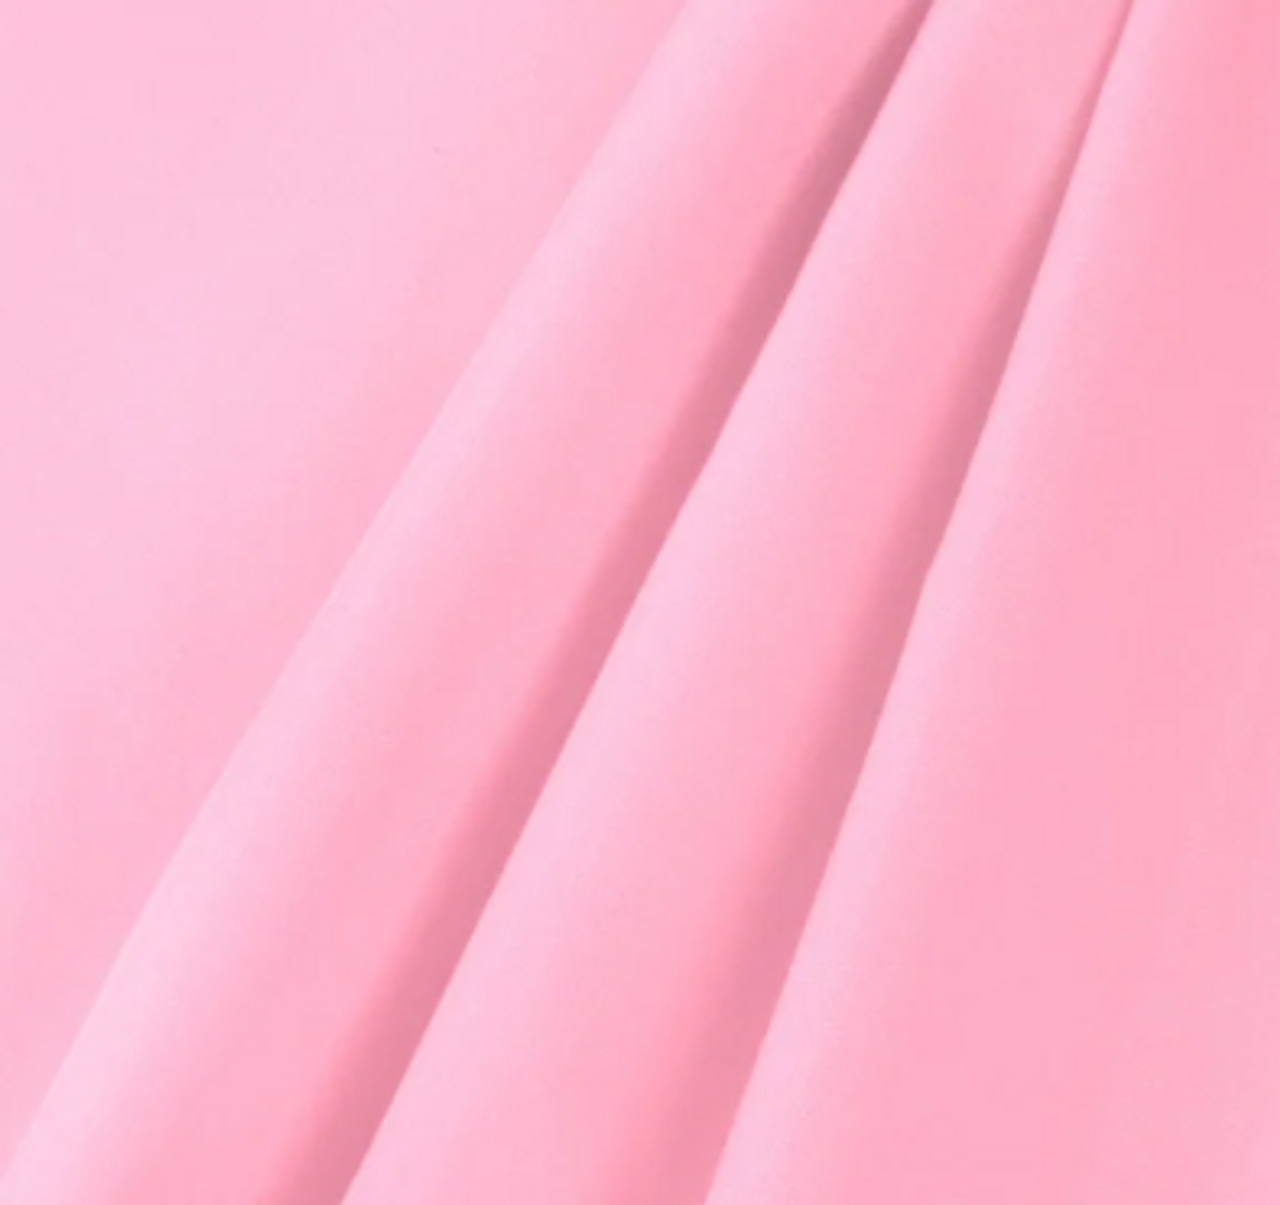 Neon Pink Poly China Silk Lining Fabric - Bridal Fabric by the Yard